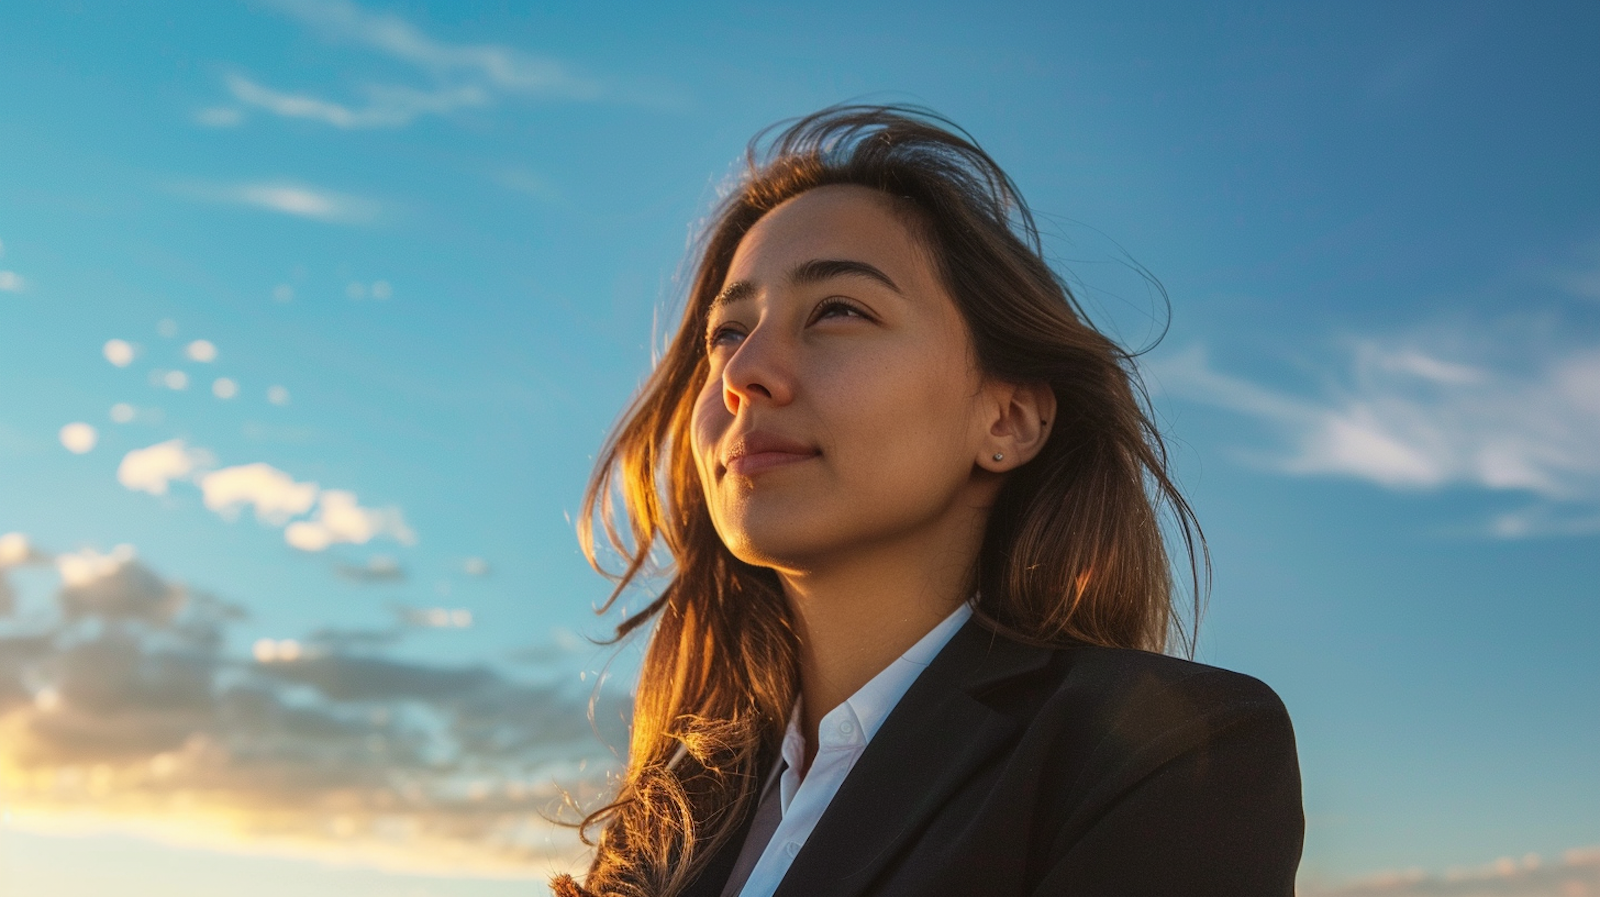 Thoughtful young Asian businesswoman under a sunset sky, portraying inspiration and leadership.